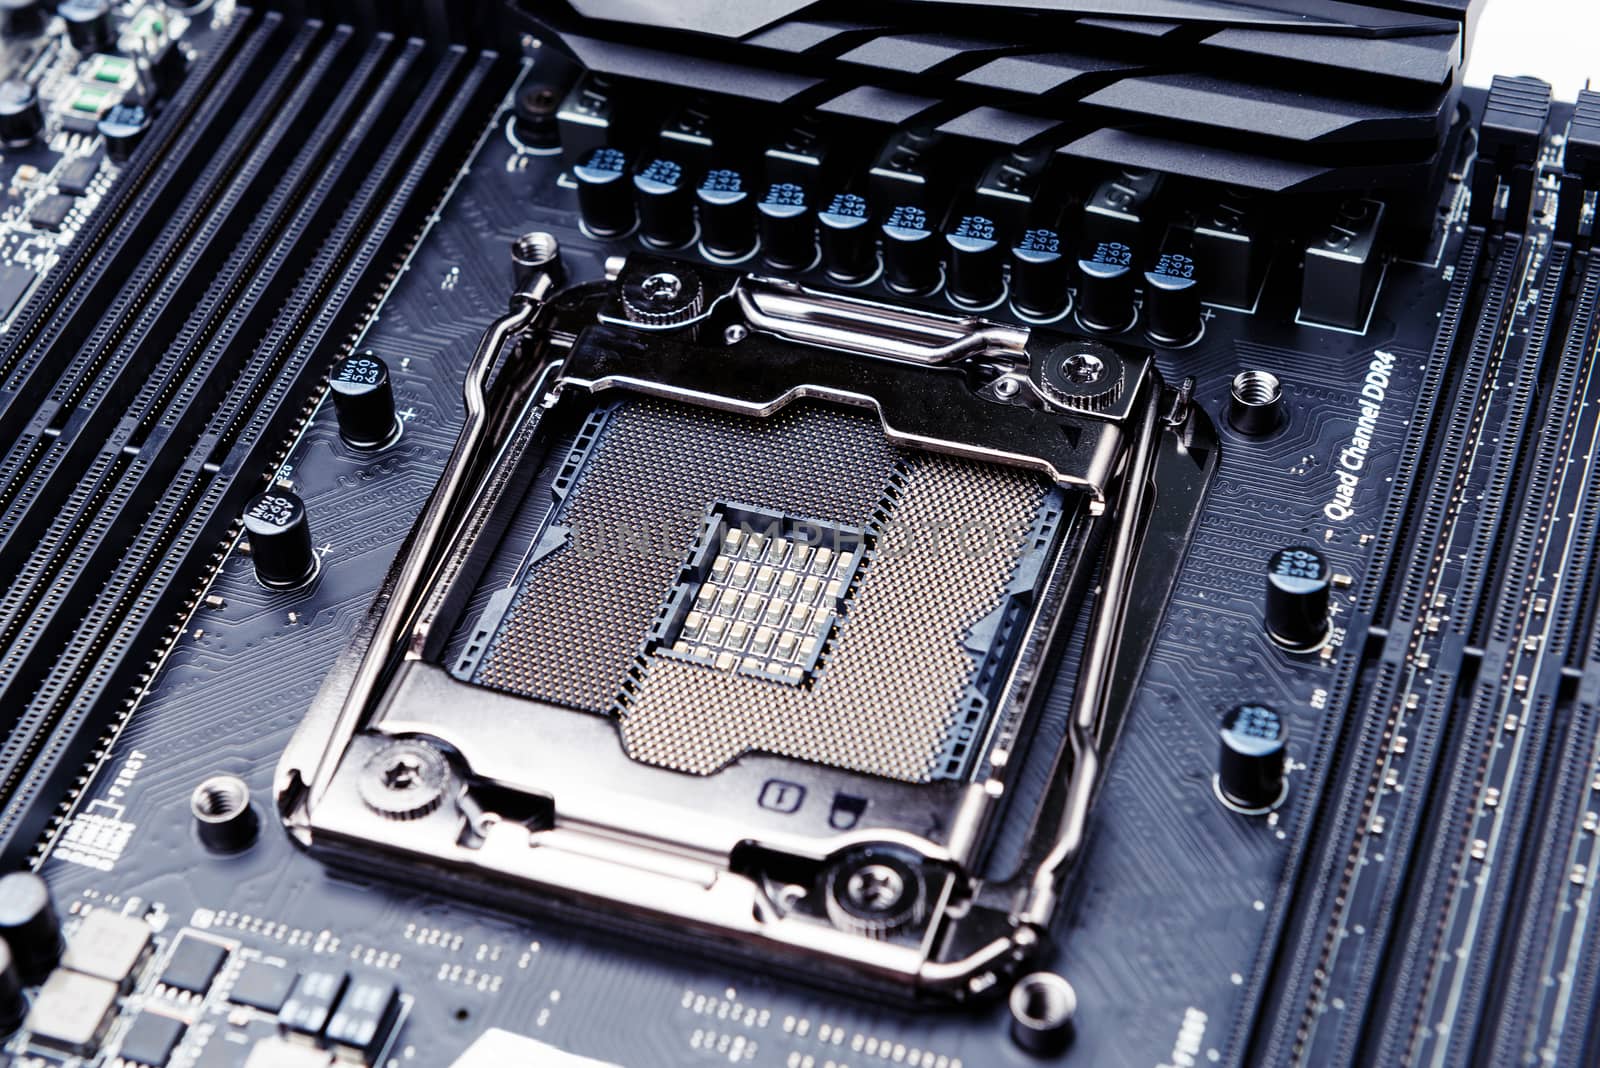 CPU socket on the motherboard. Toned image